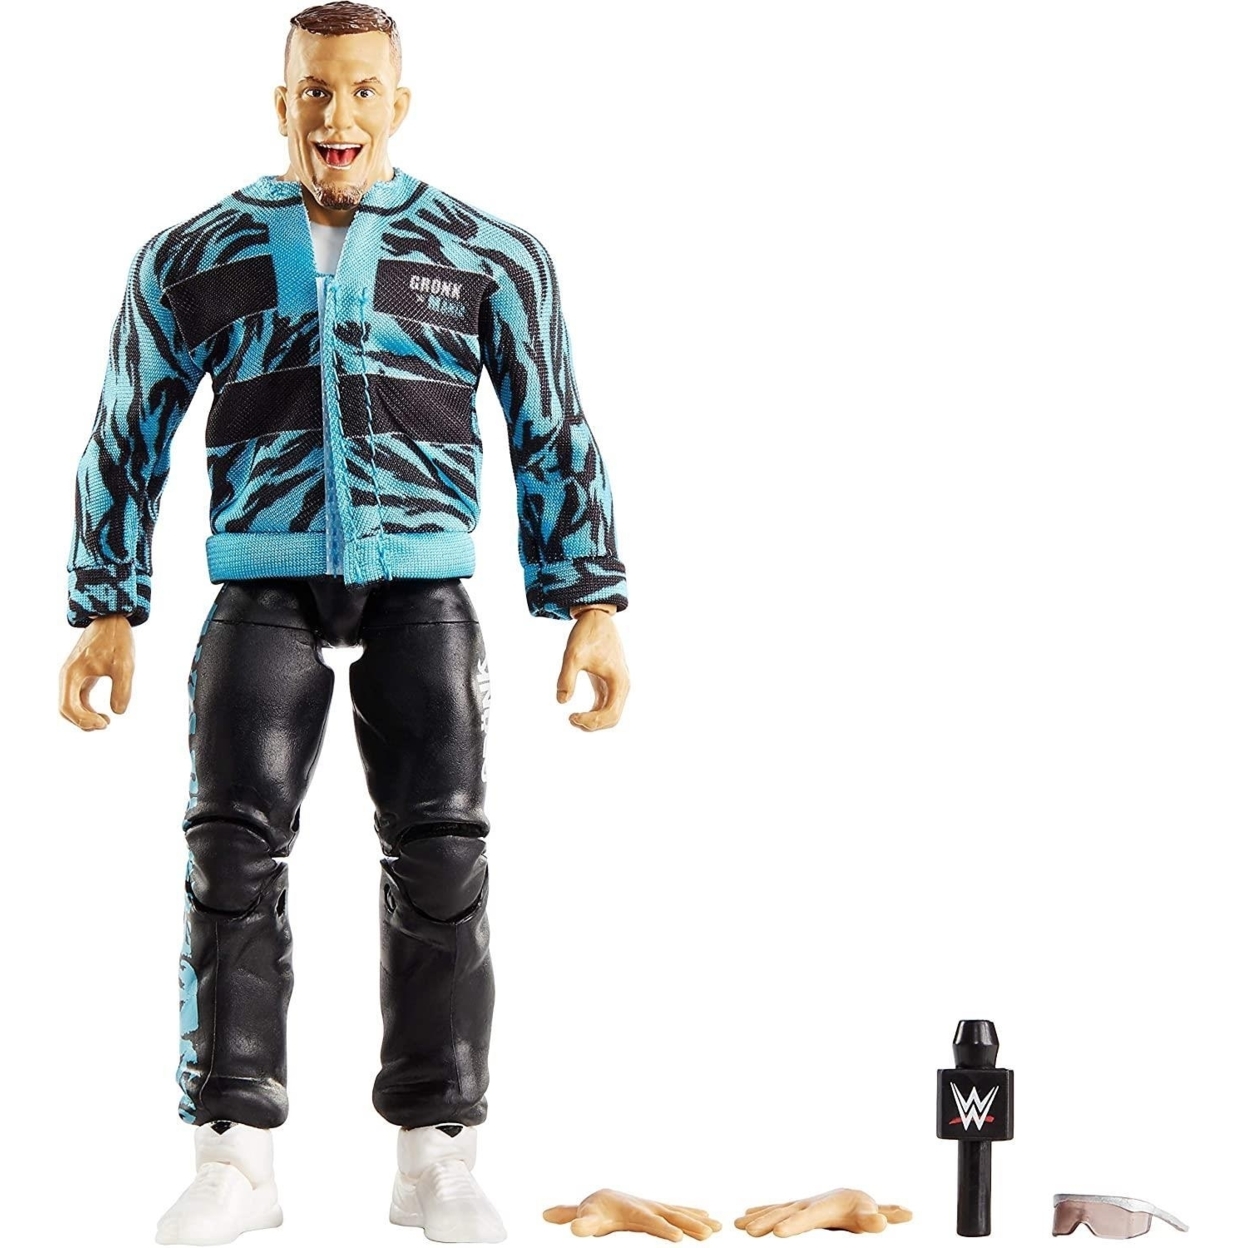 WWE Rob Gronkowski Elite Collection Action Figure with Accessories - image 1 of 7